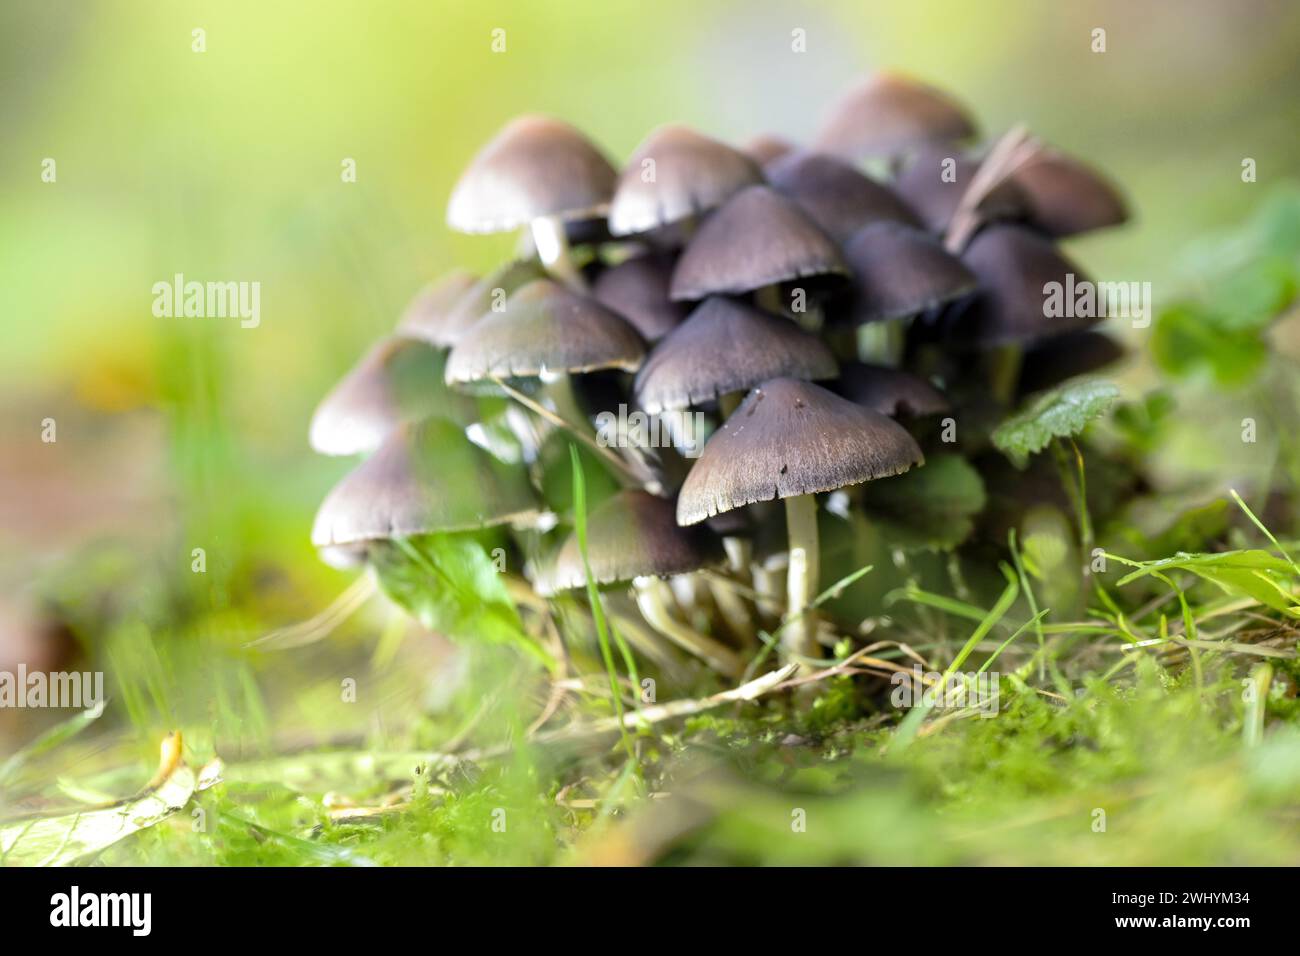 Group of fungi (probably Psathyrella pygmaea), mushrooms with brown caps and thin white hollow stems in green moss in a deciduou Stock Photo